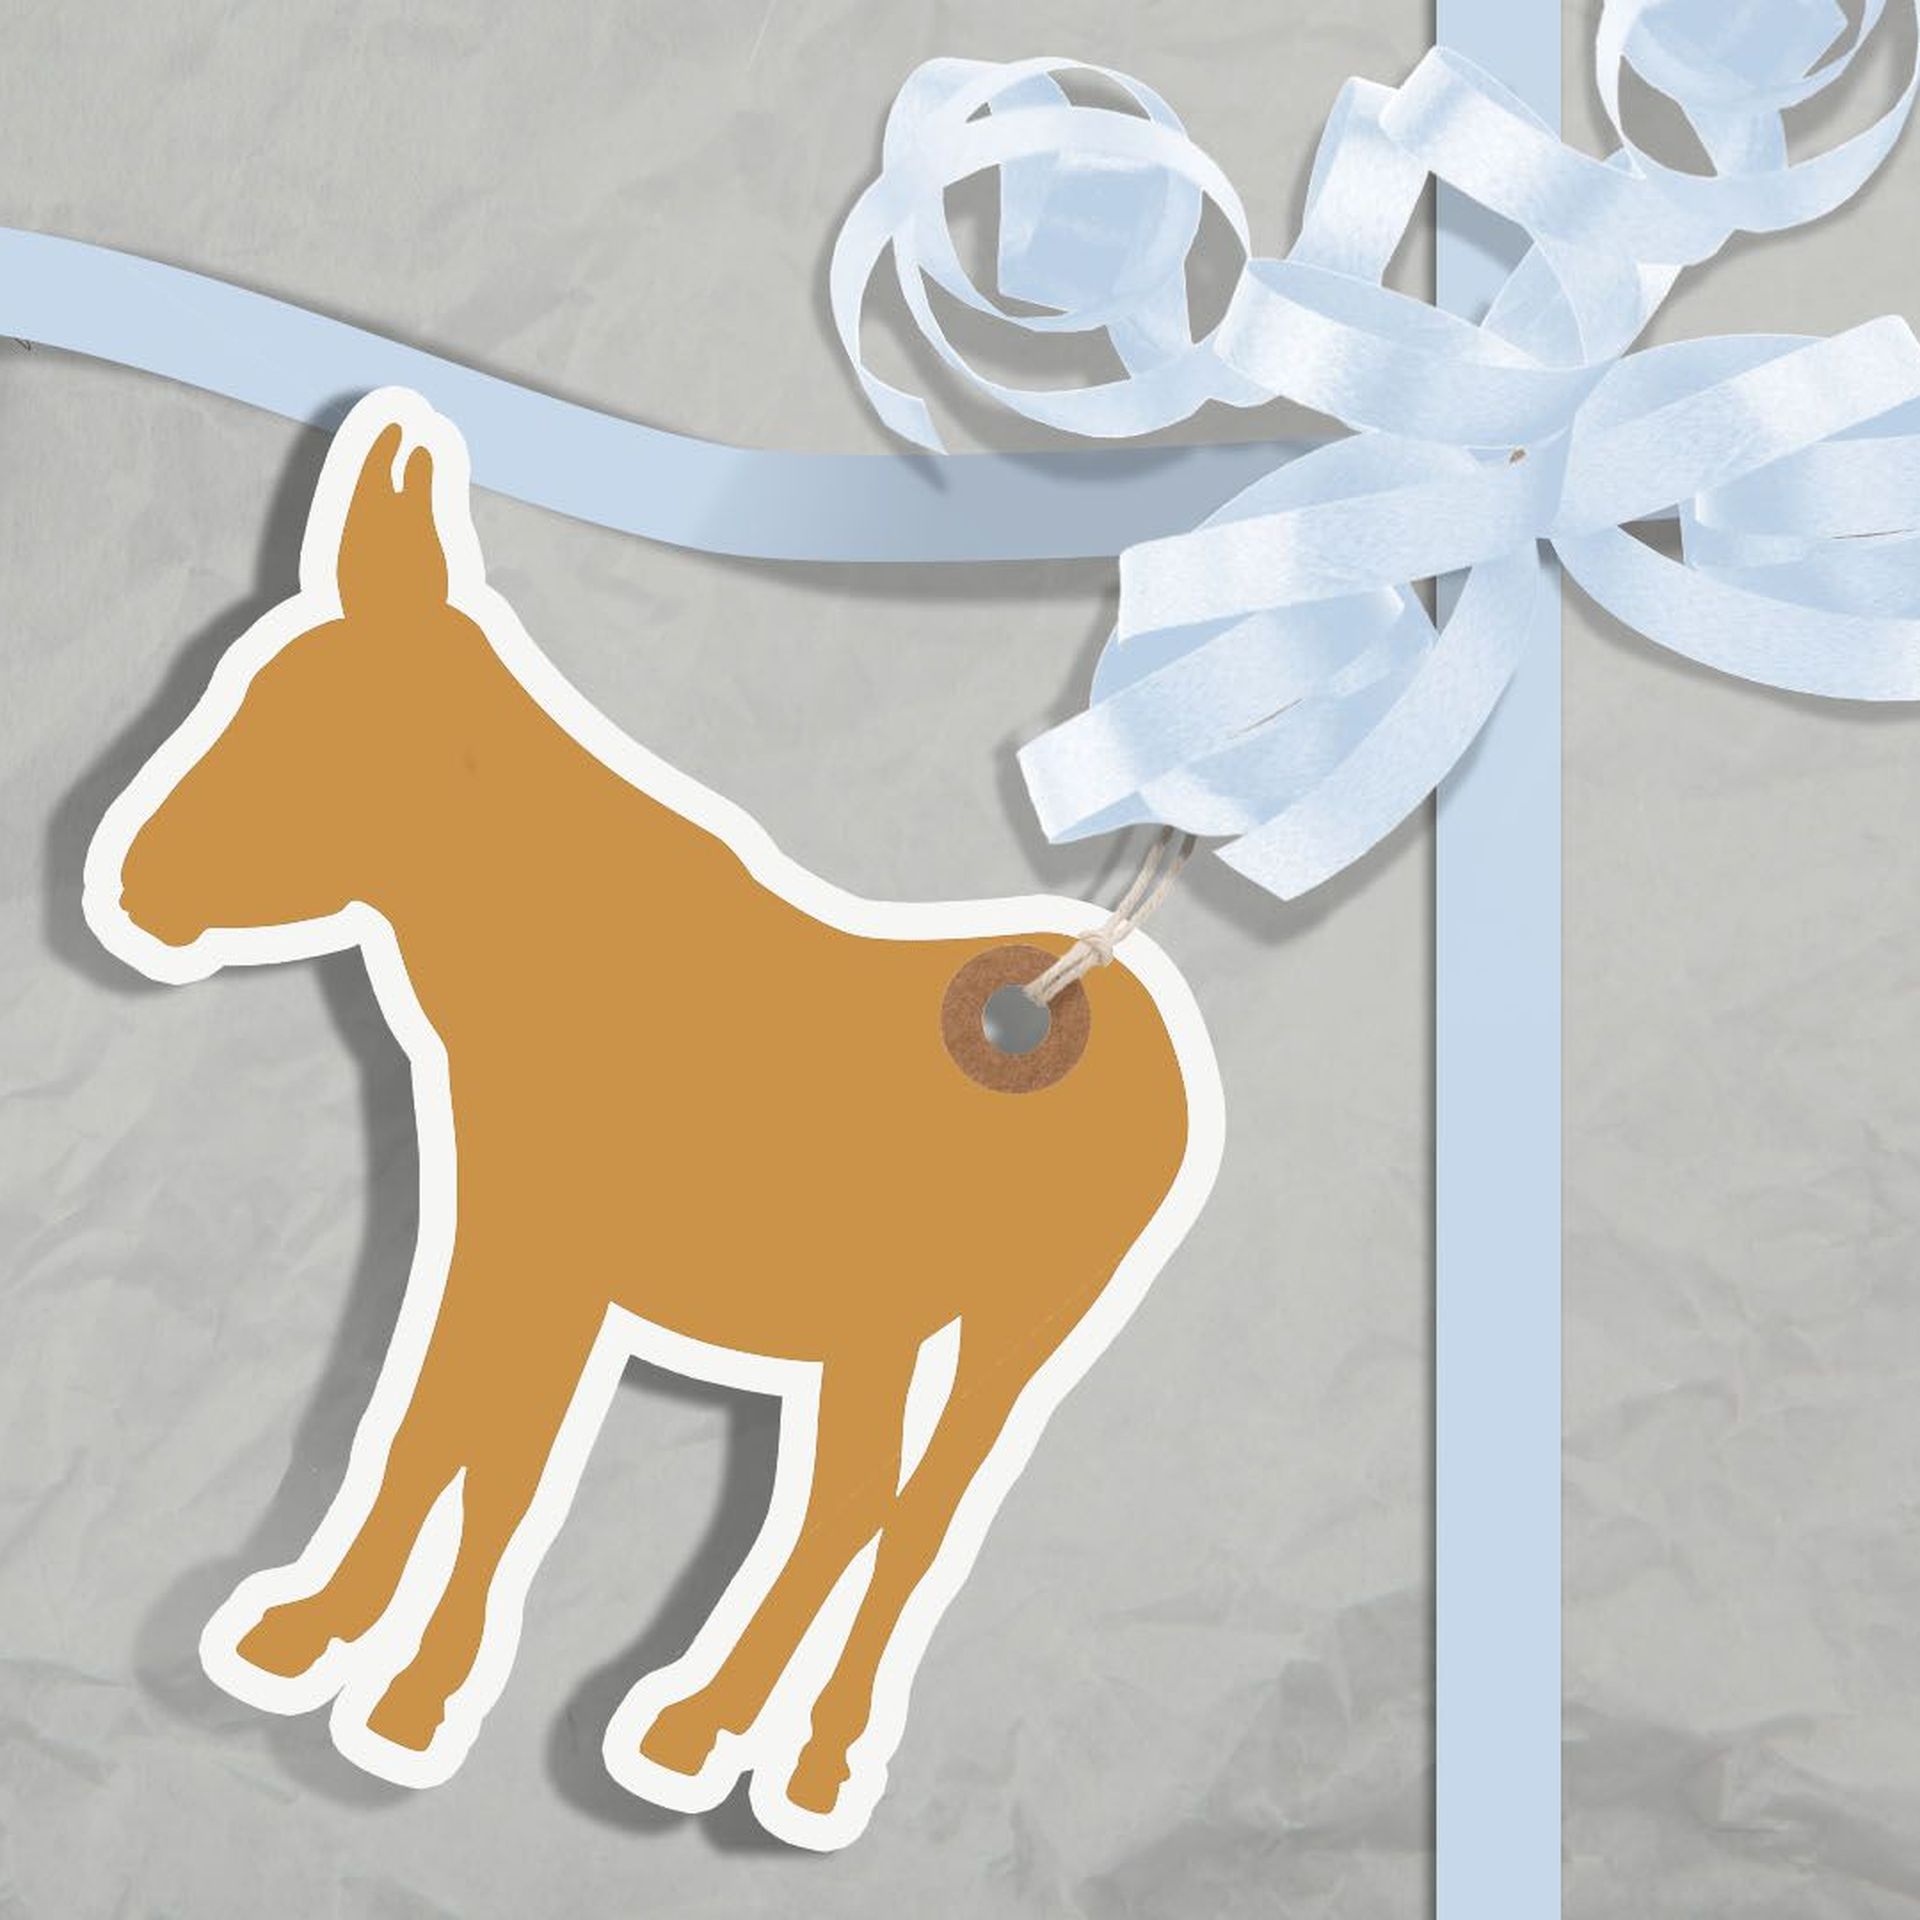 Illustration of a partially unwrapped gift with a donkey greeting card attached